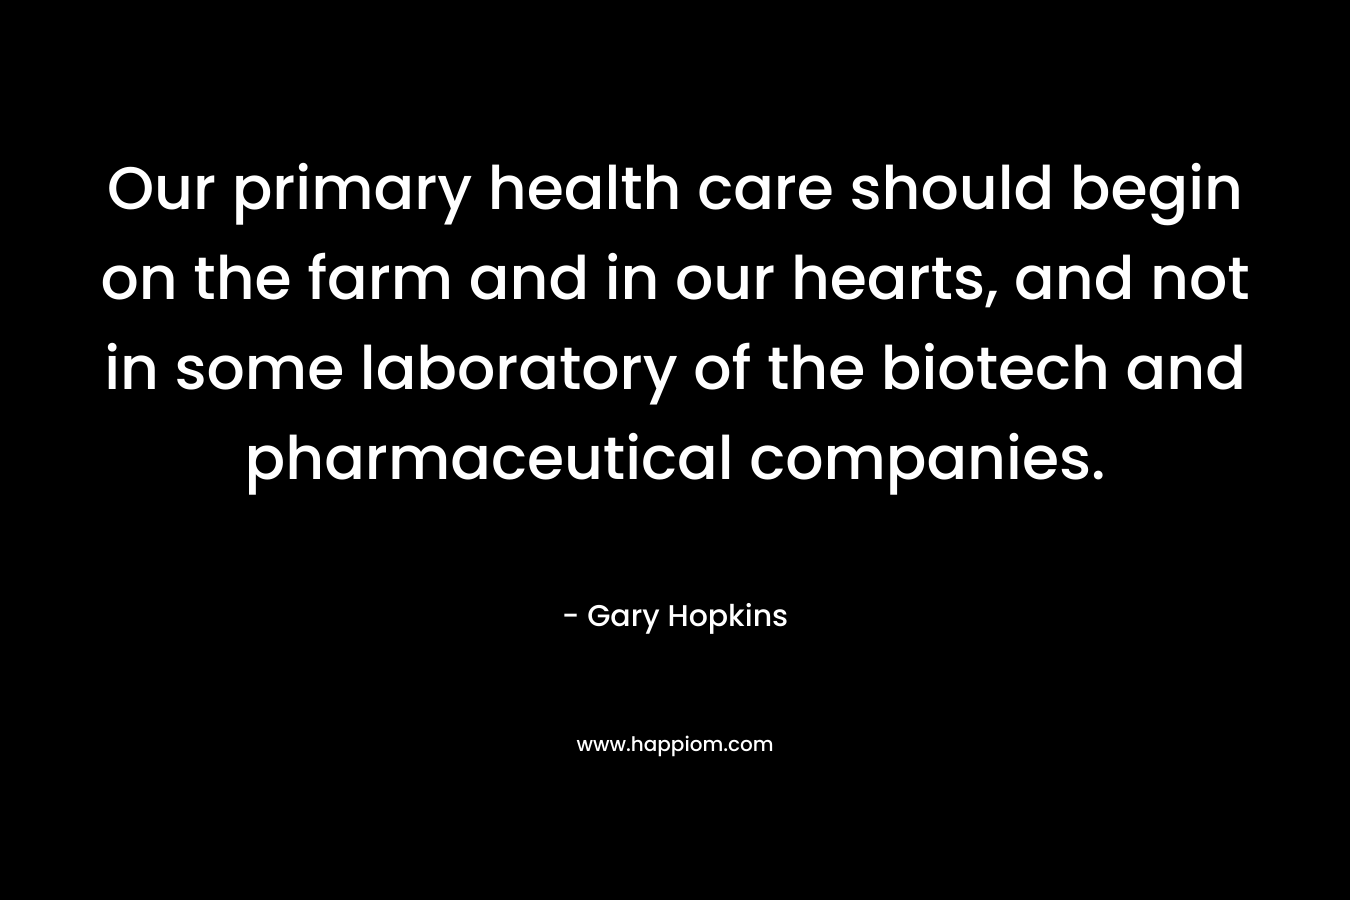 Our primary health care should begin on the farm and in our hearts, and not in some laboratory of the biotech and pharmaceutical companies.